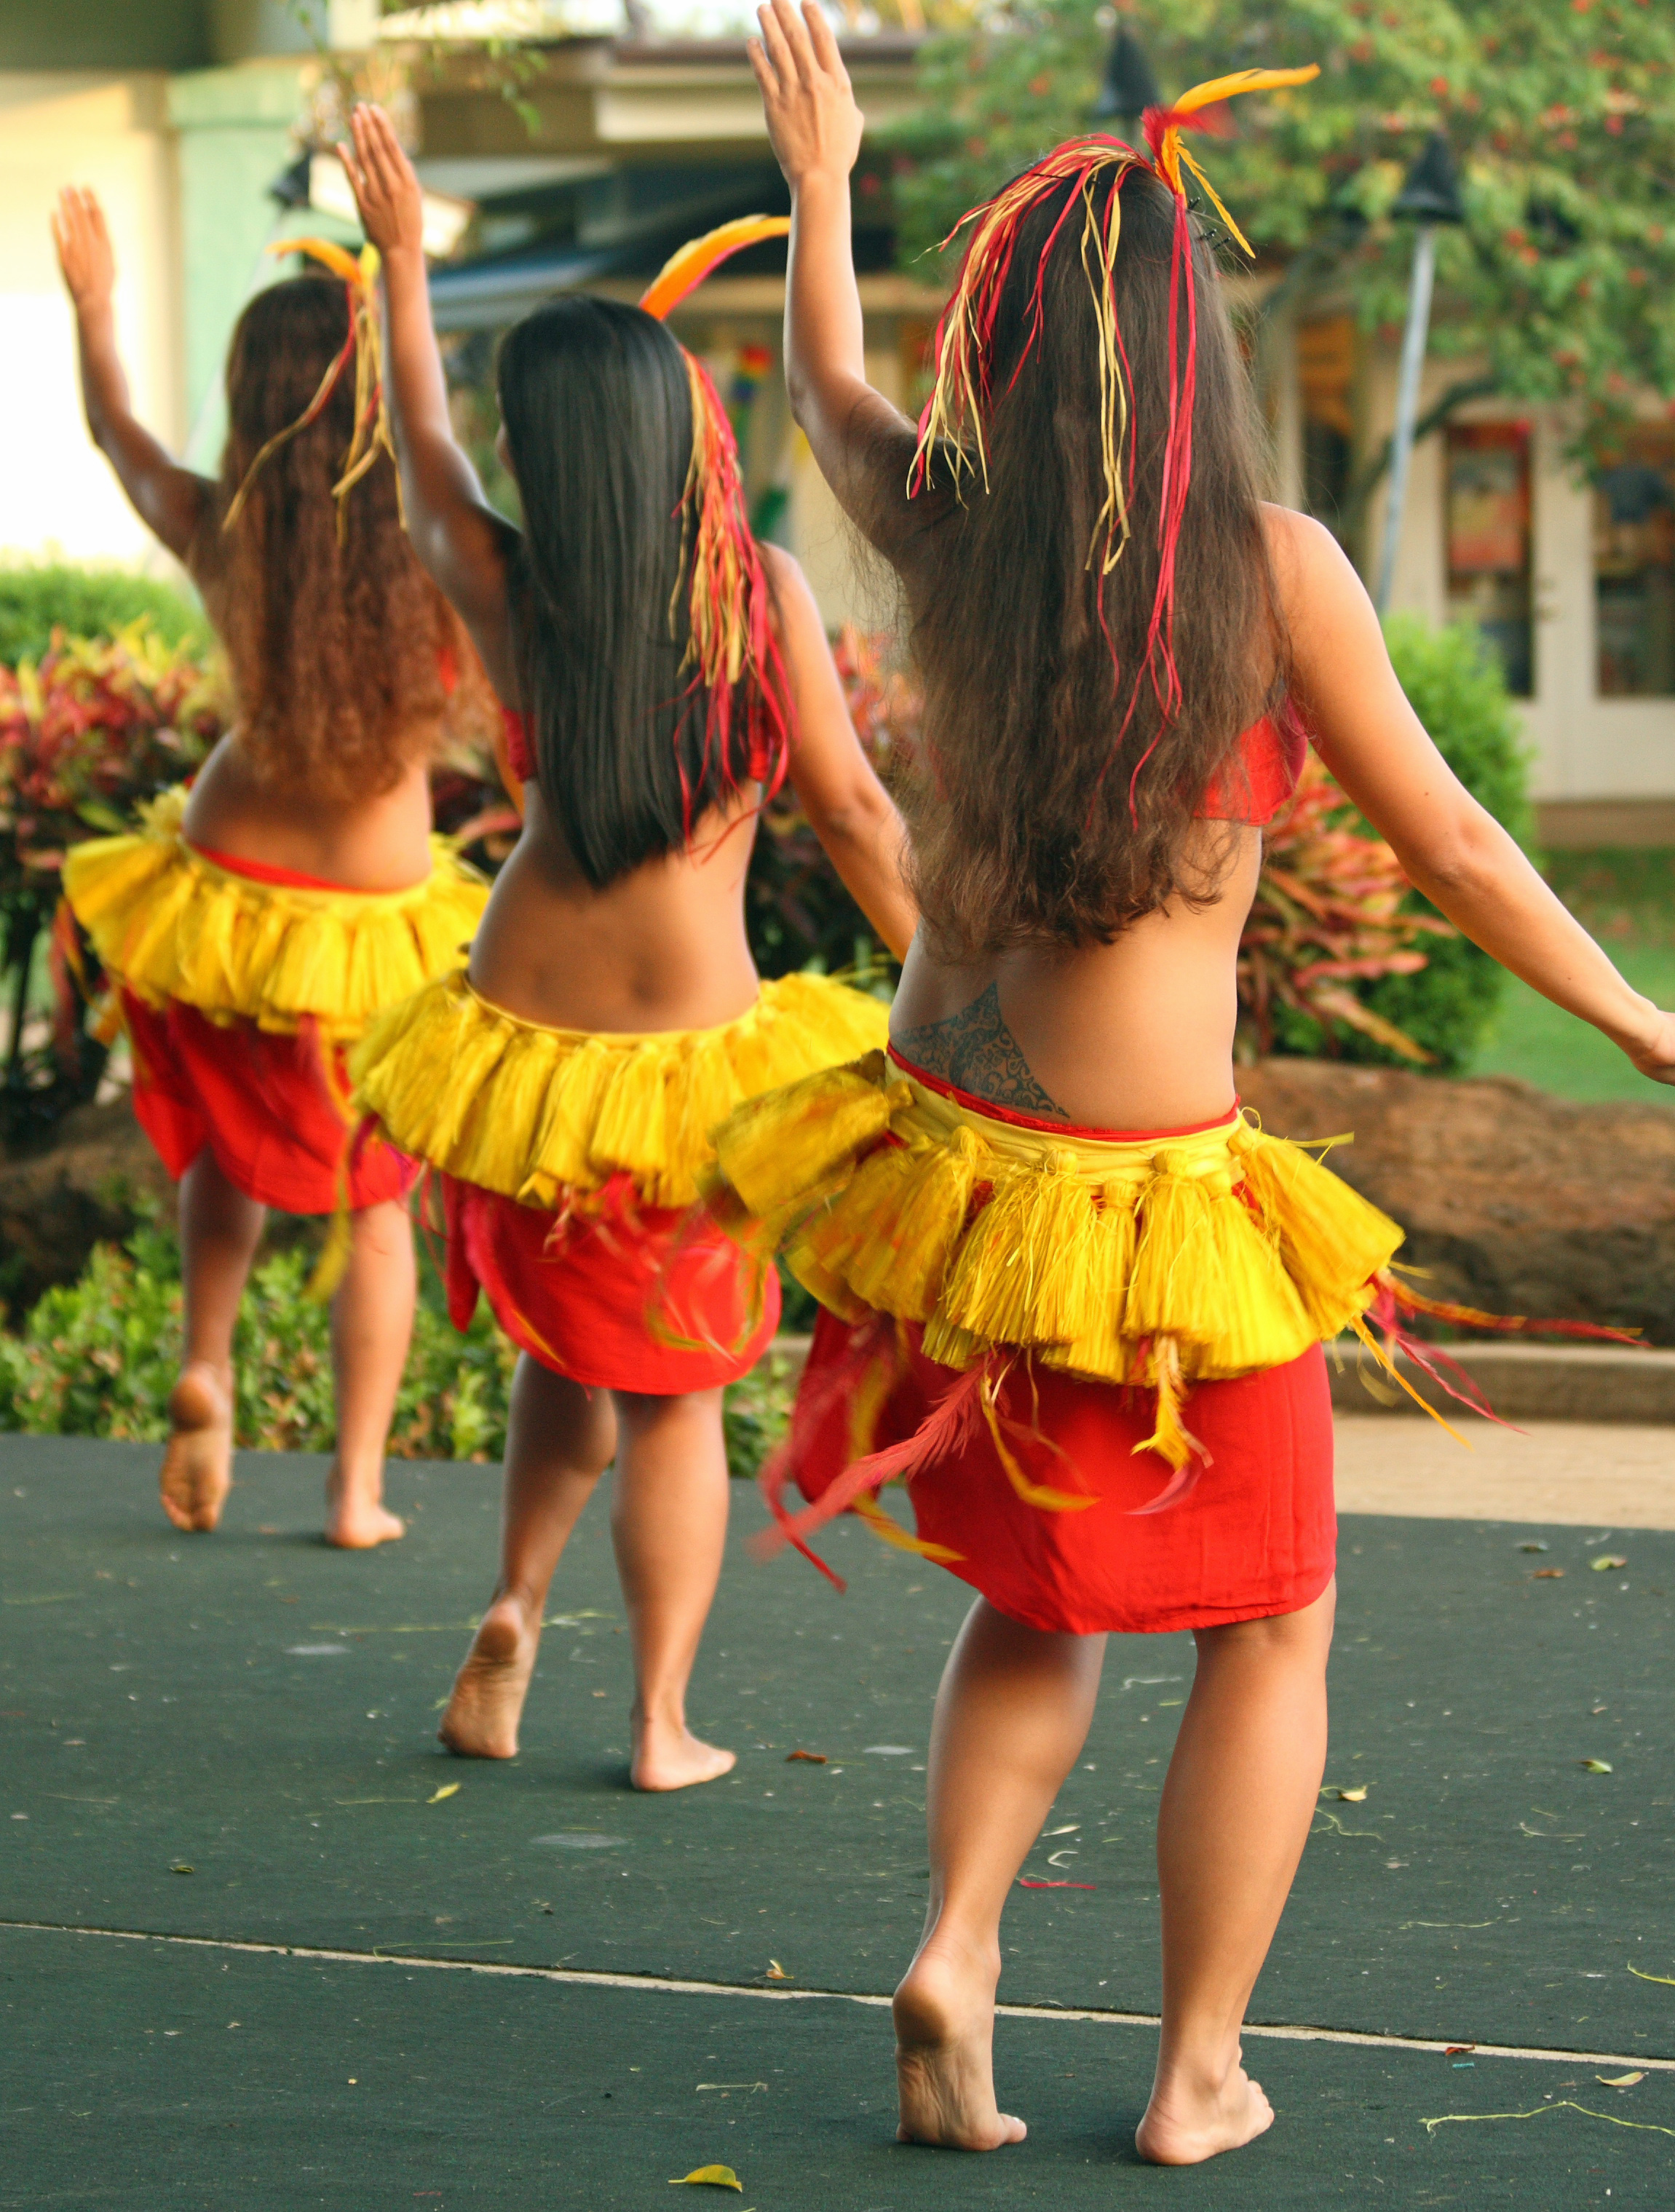 File:Three lovely hula dancers from behind (4829089541).jpg ...